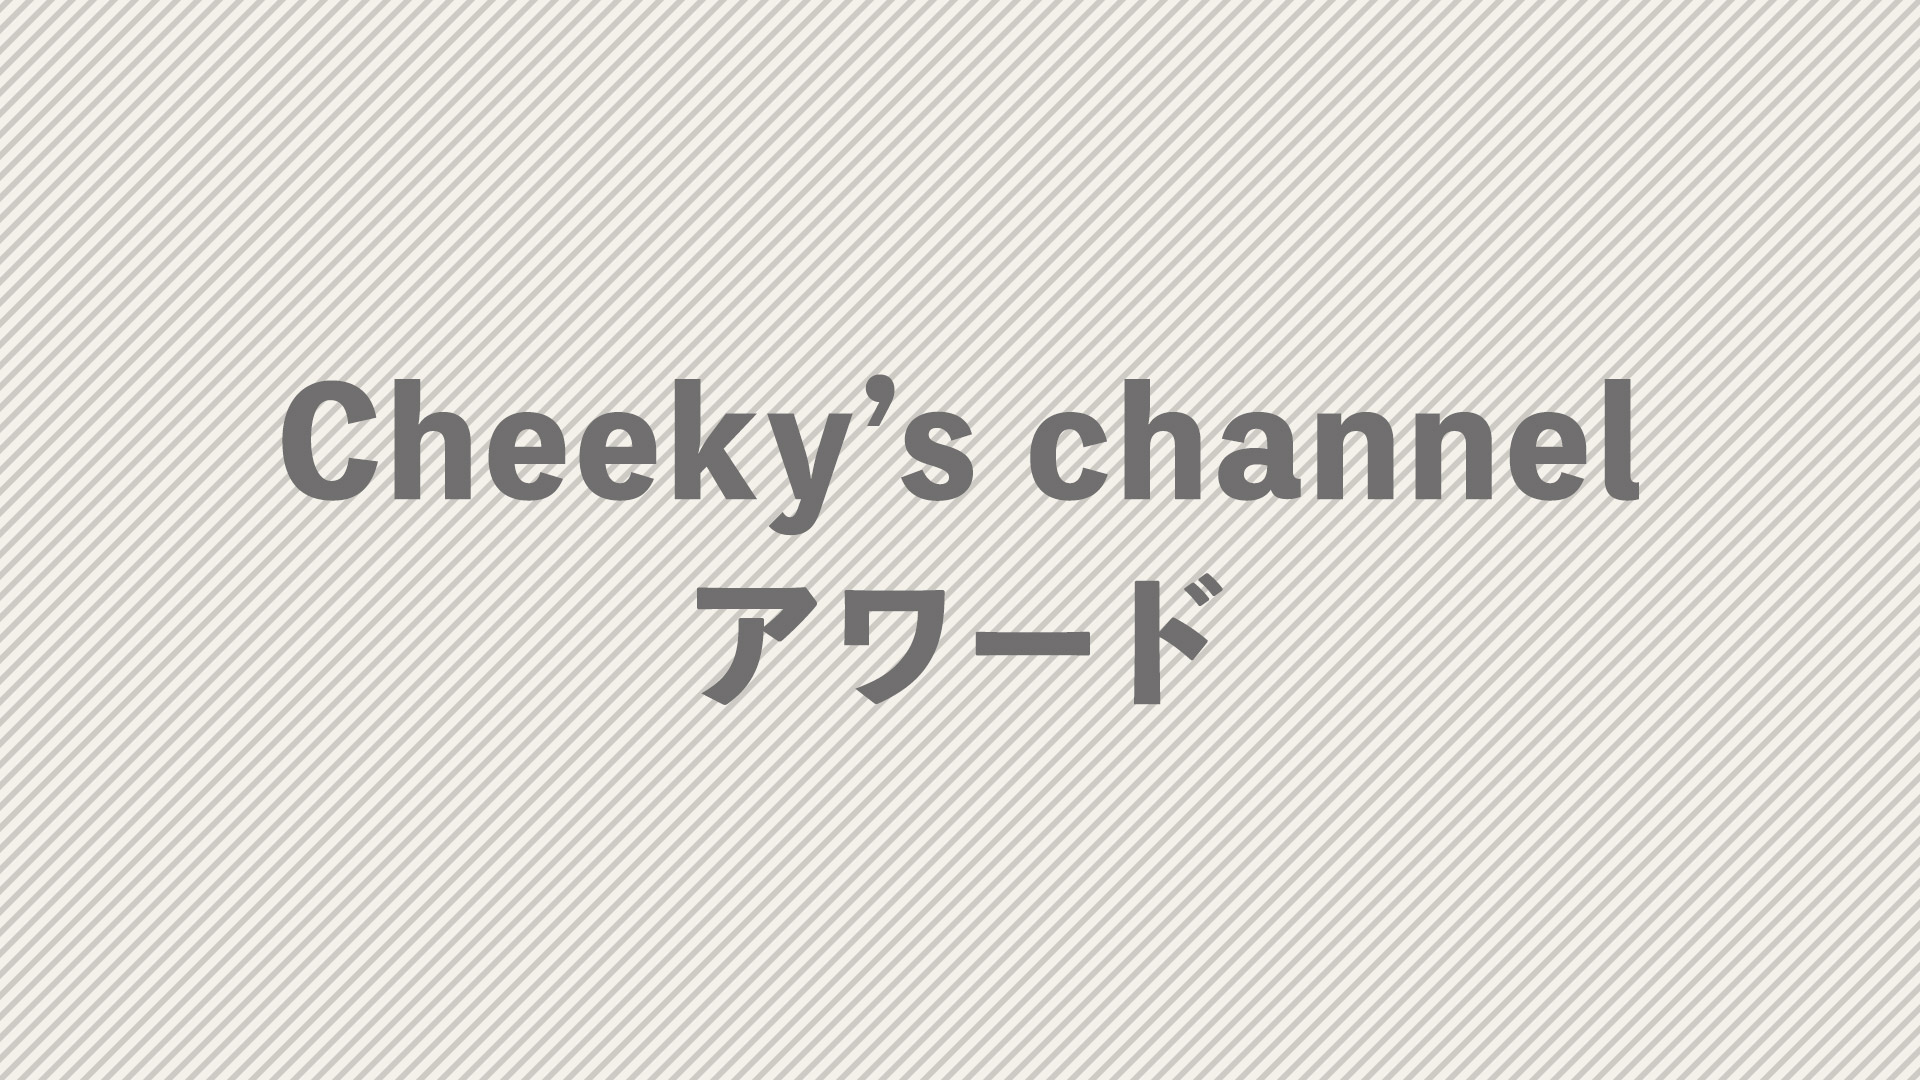 Cheeky’s channelアワード